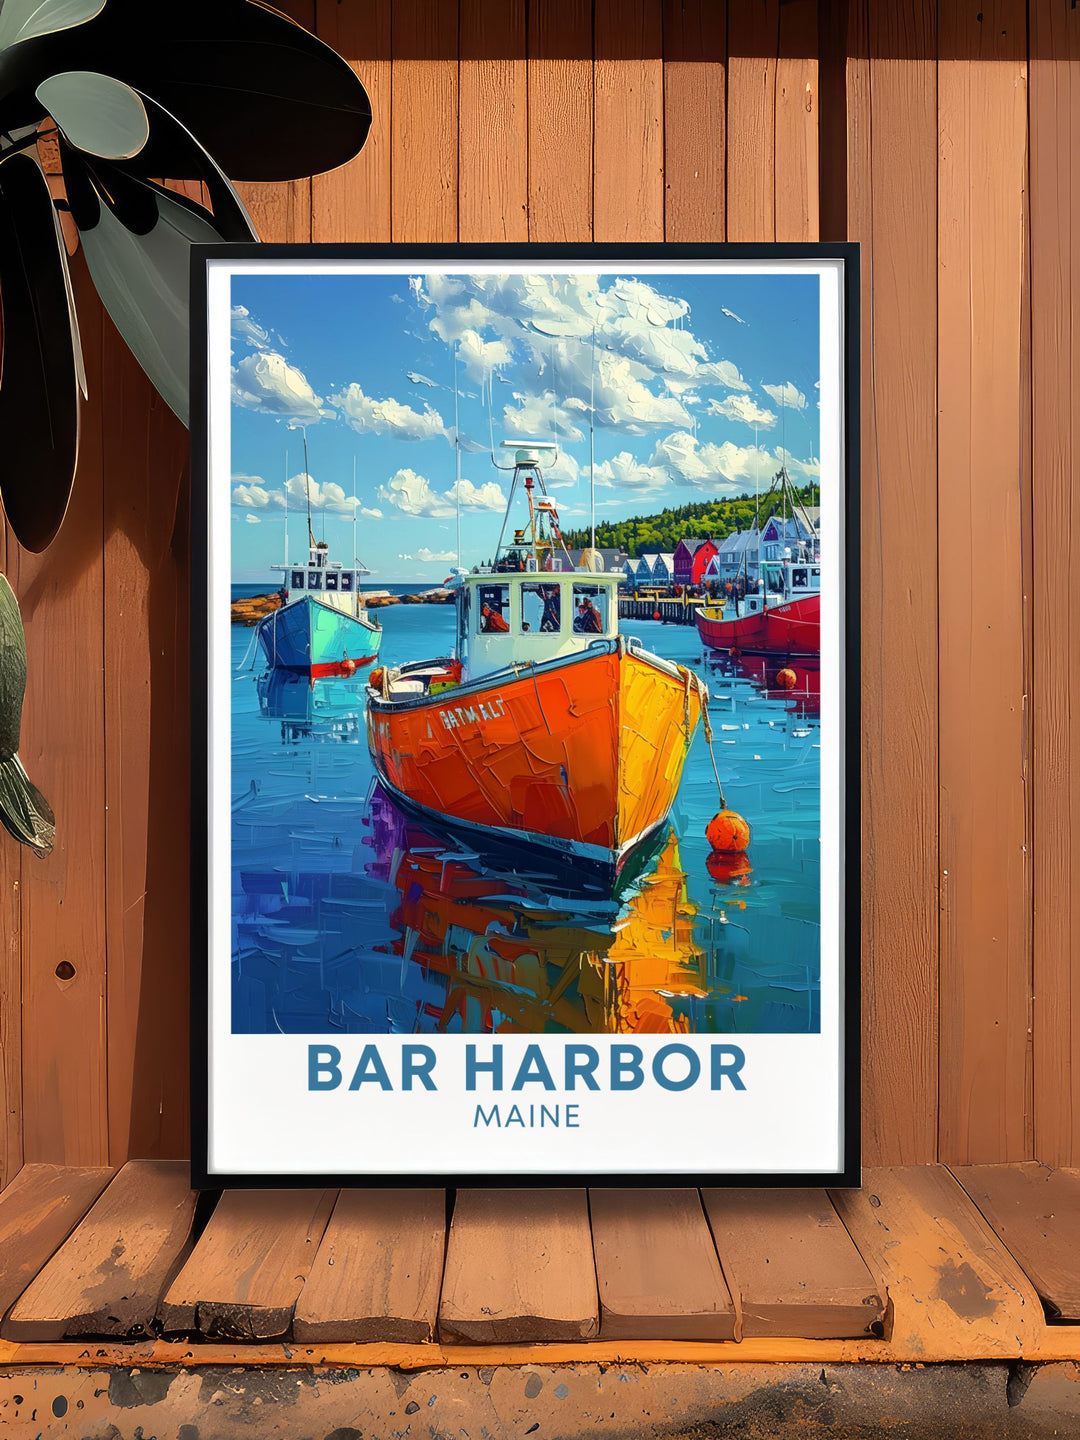 Celebrating the rich history of Bar Harbor, this poster captures the towns enduring charm and historical significance. Perfect for history lovers.